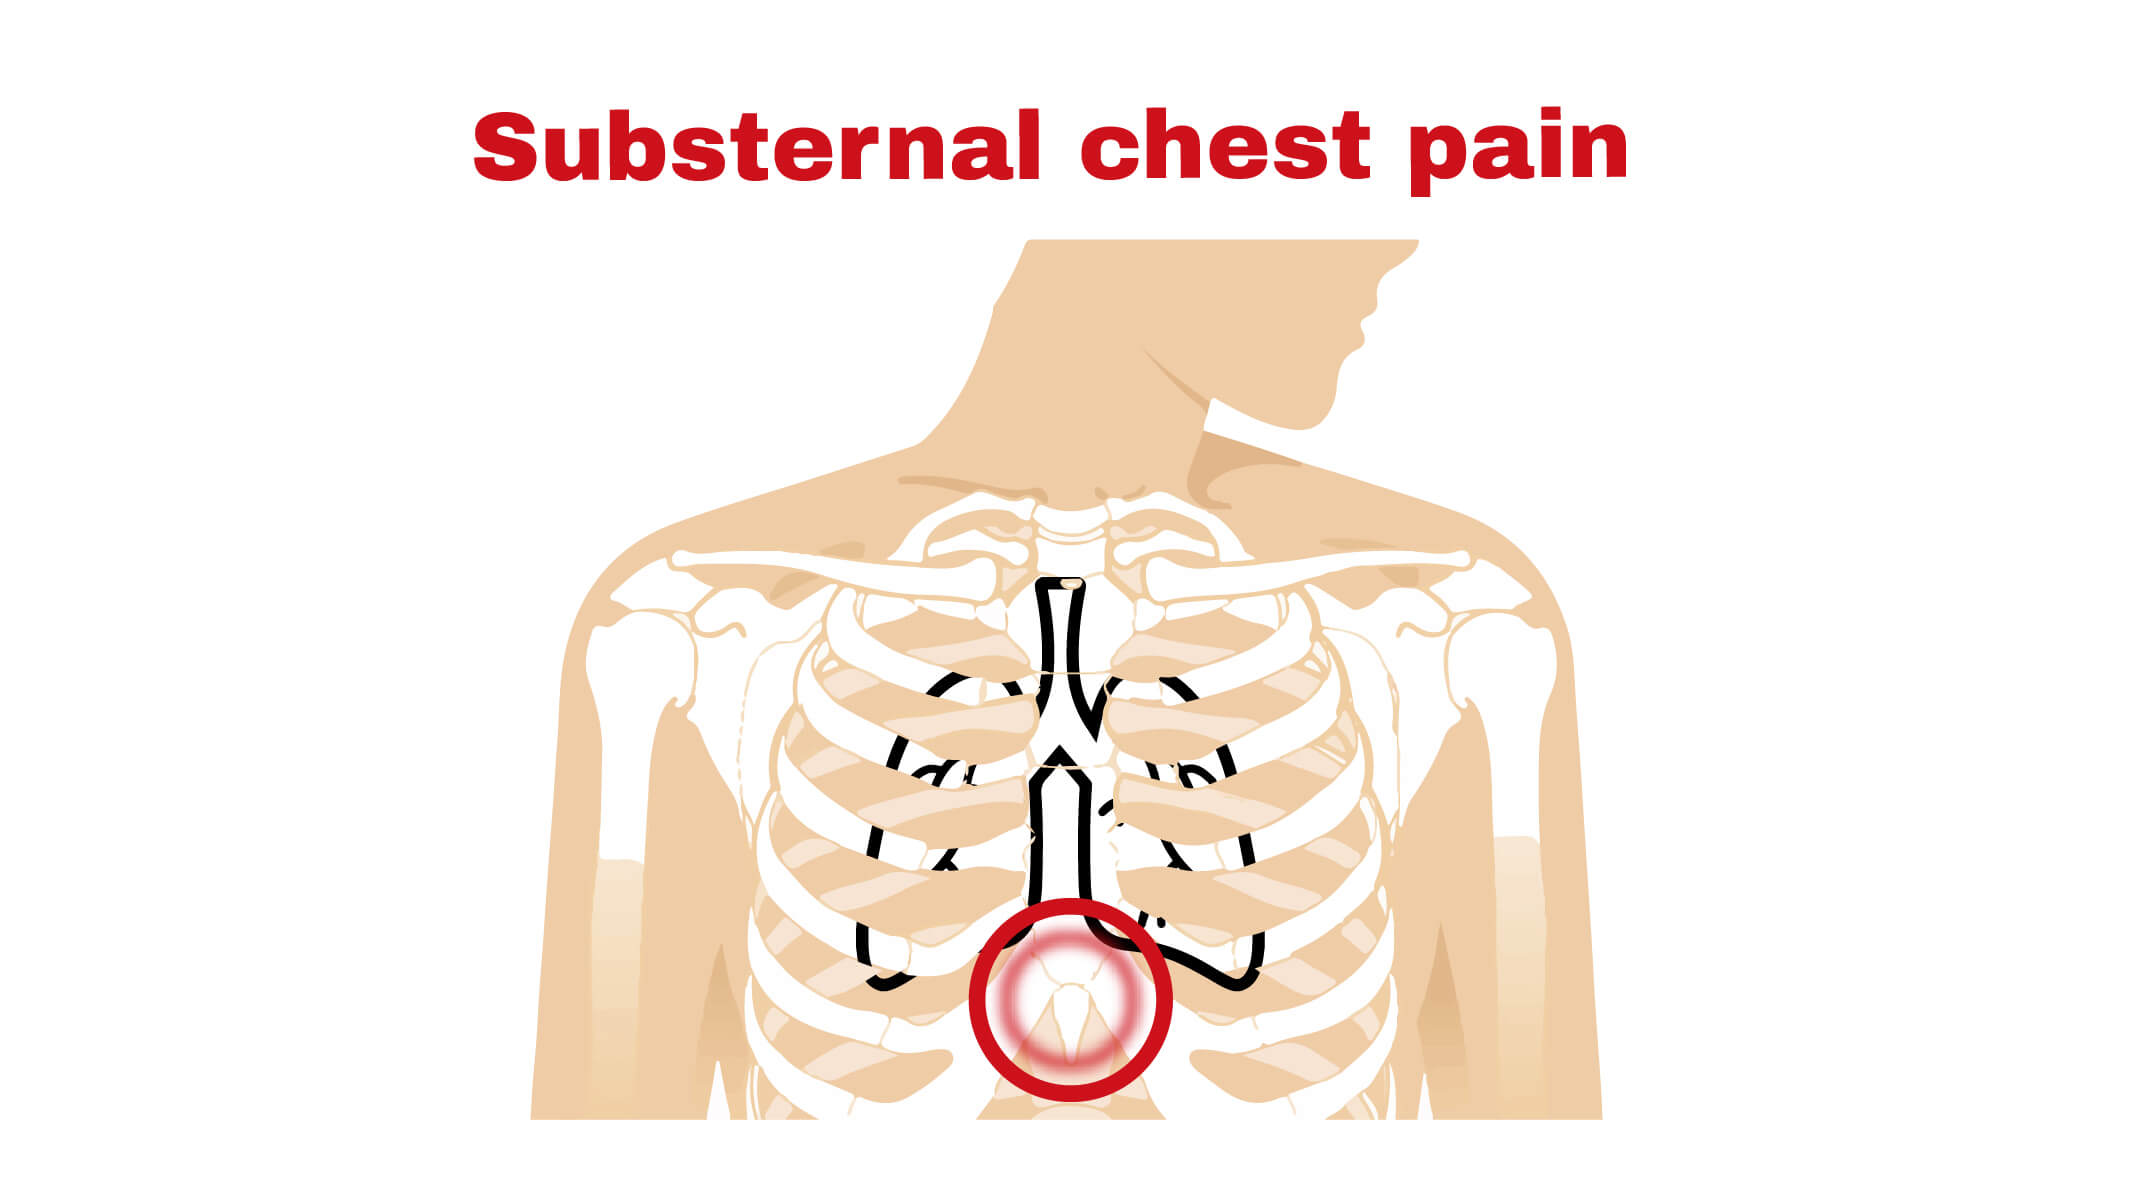 Substernal chest pain